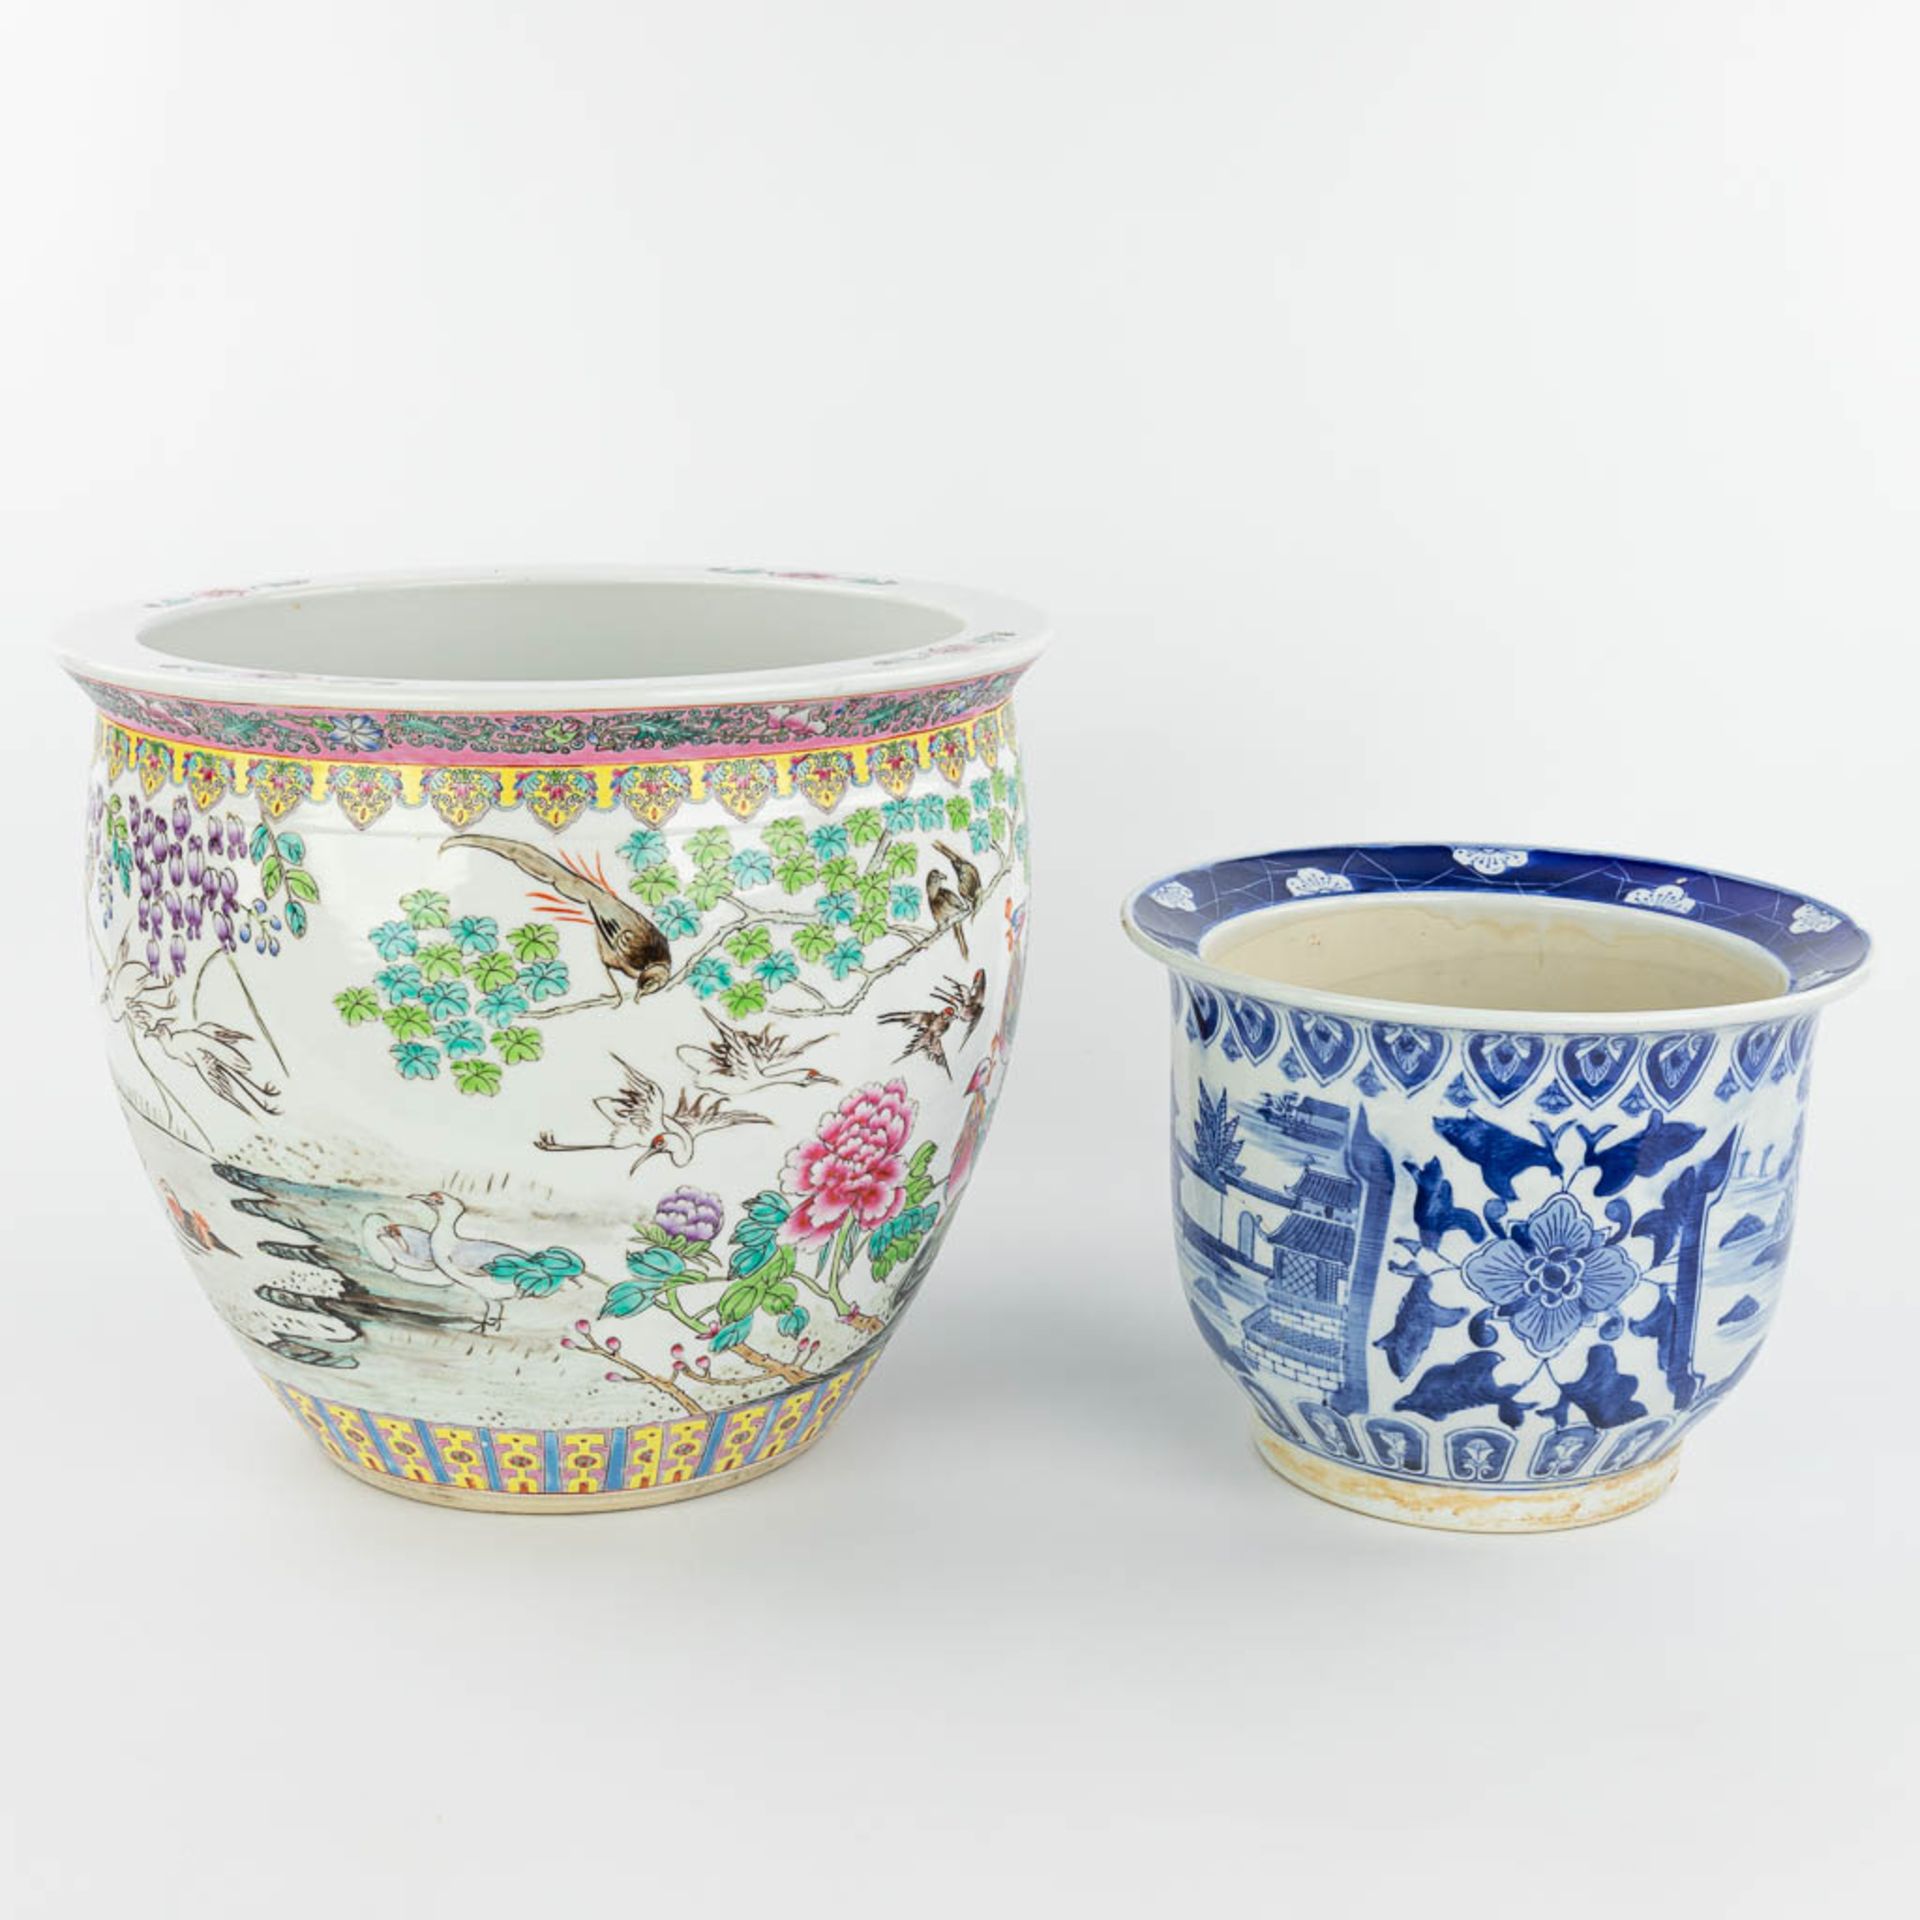 A set of 2 Chinese cache-pots made of porcelain of which 1 has a blue-white decor and the other a de - Image 3 of 15